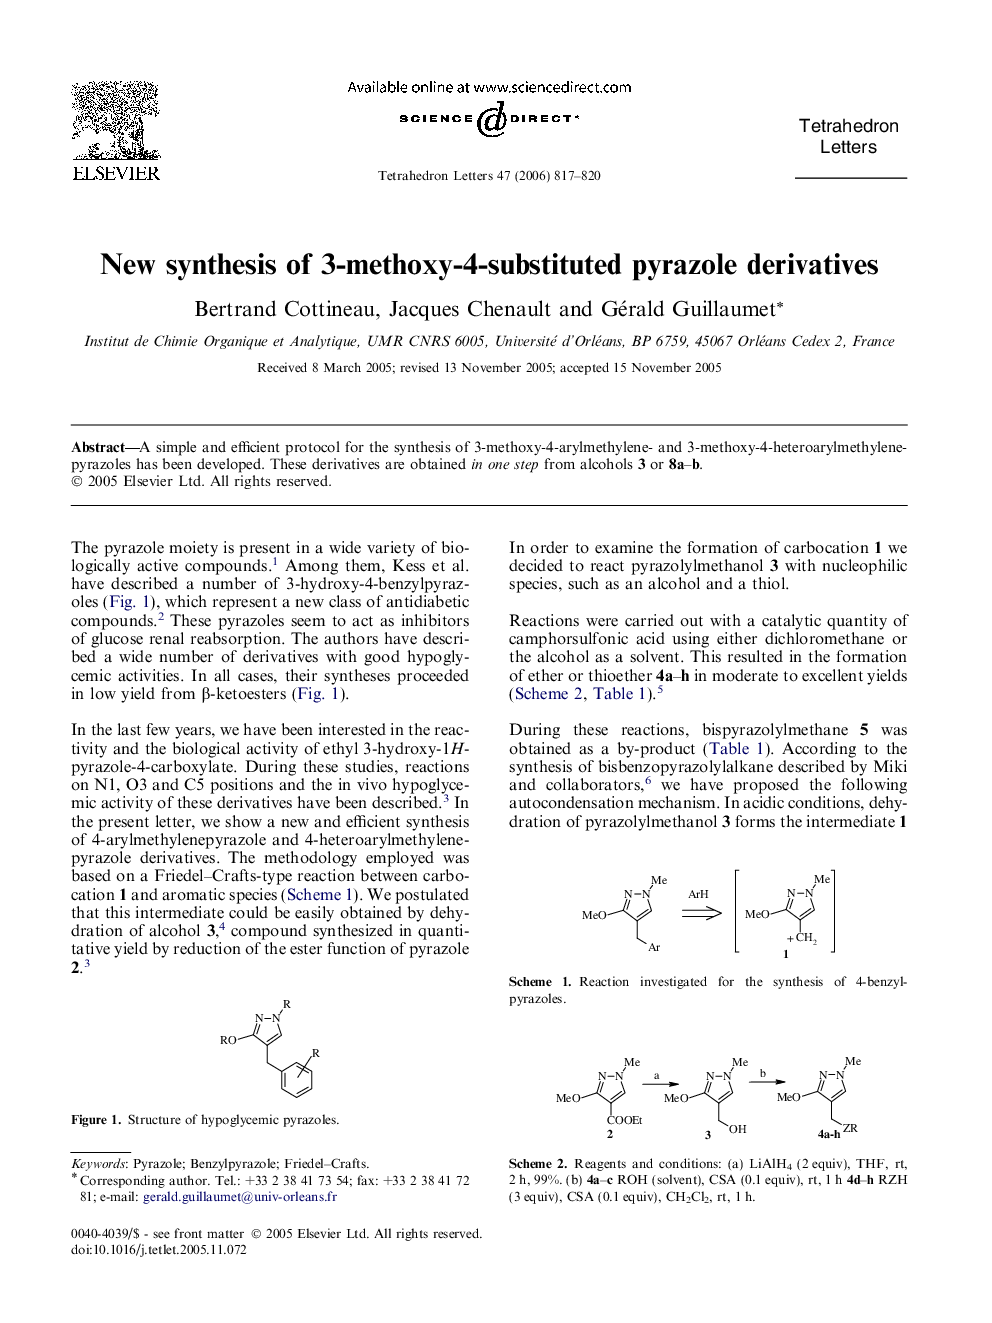 New synthesis of 3-methoxy-4-substituted pyrazole derivatives